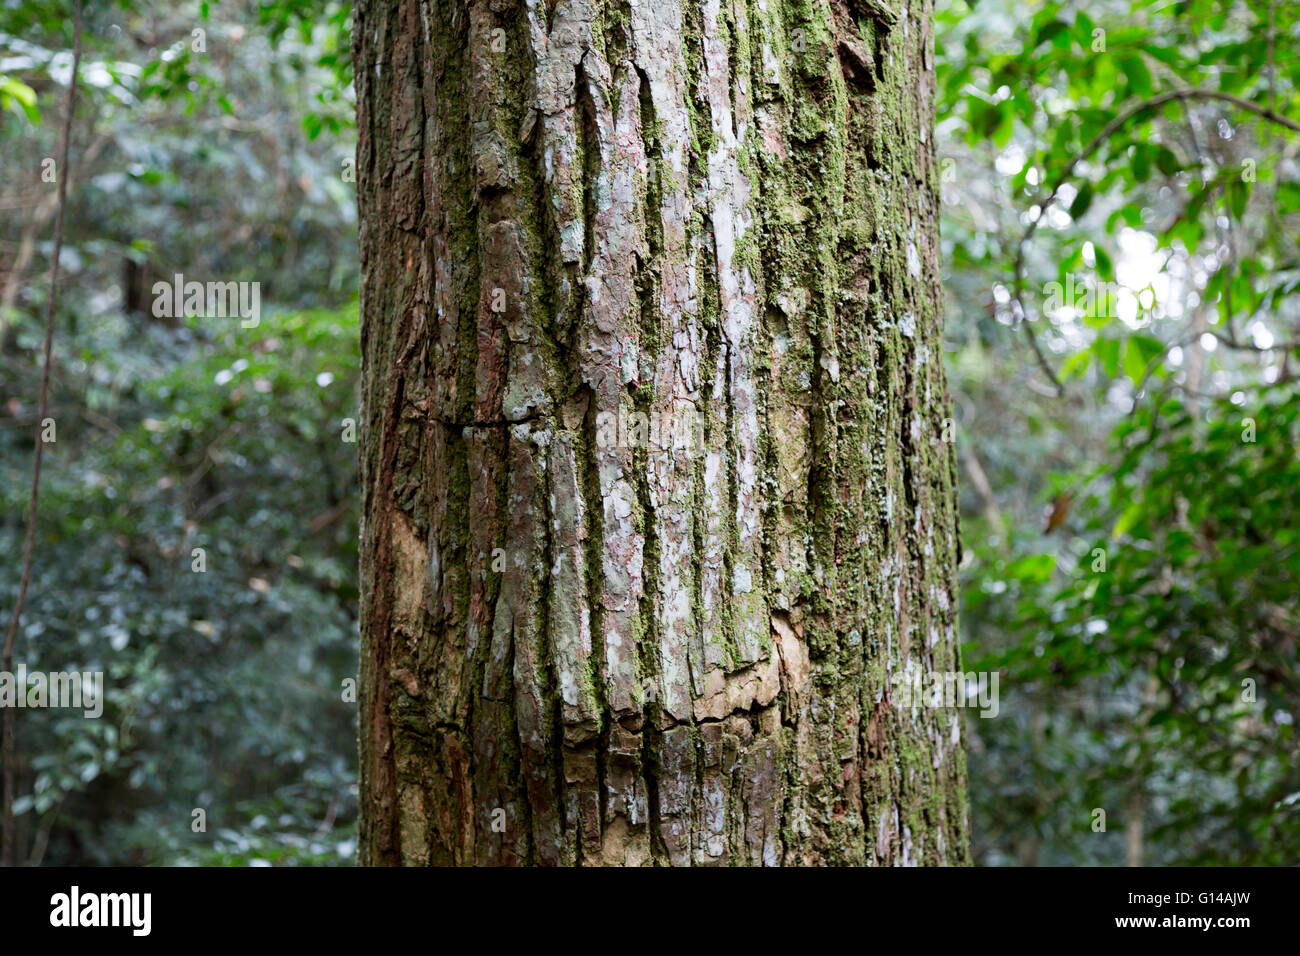 Sao Paulo, Brazil. 8th May, 2016. Cedro Rosa (Cedrela fissilis) tree, trunk detail - this species has been overexploited for timber and is now considered to be endangered - is seen during this cloudy day in Cantareira State Park (Portuguese: Parque Estadual da Cantareira) in Sao Paulo, Brazil. Credit:  Andre M. Chang/ARDUOPRESS/Alamy Live News Stock Photo